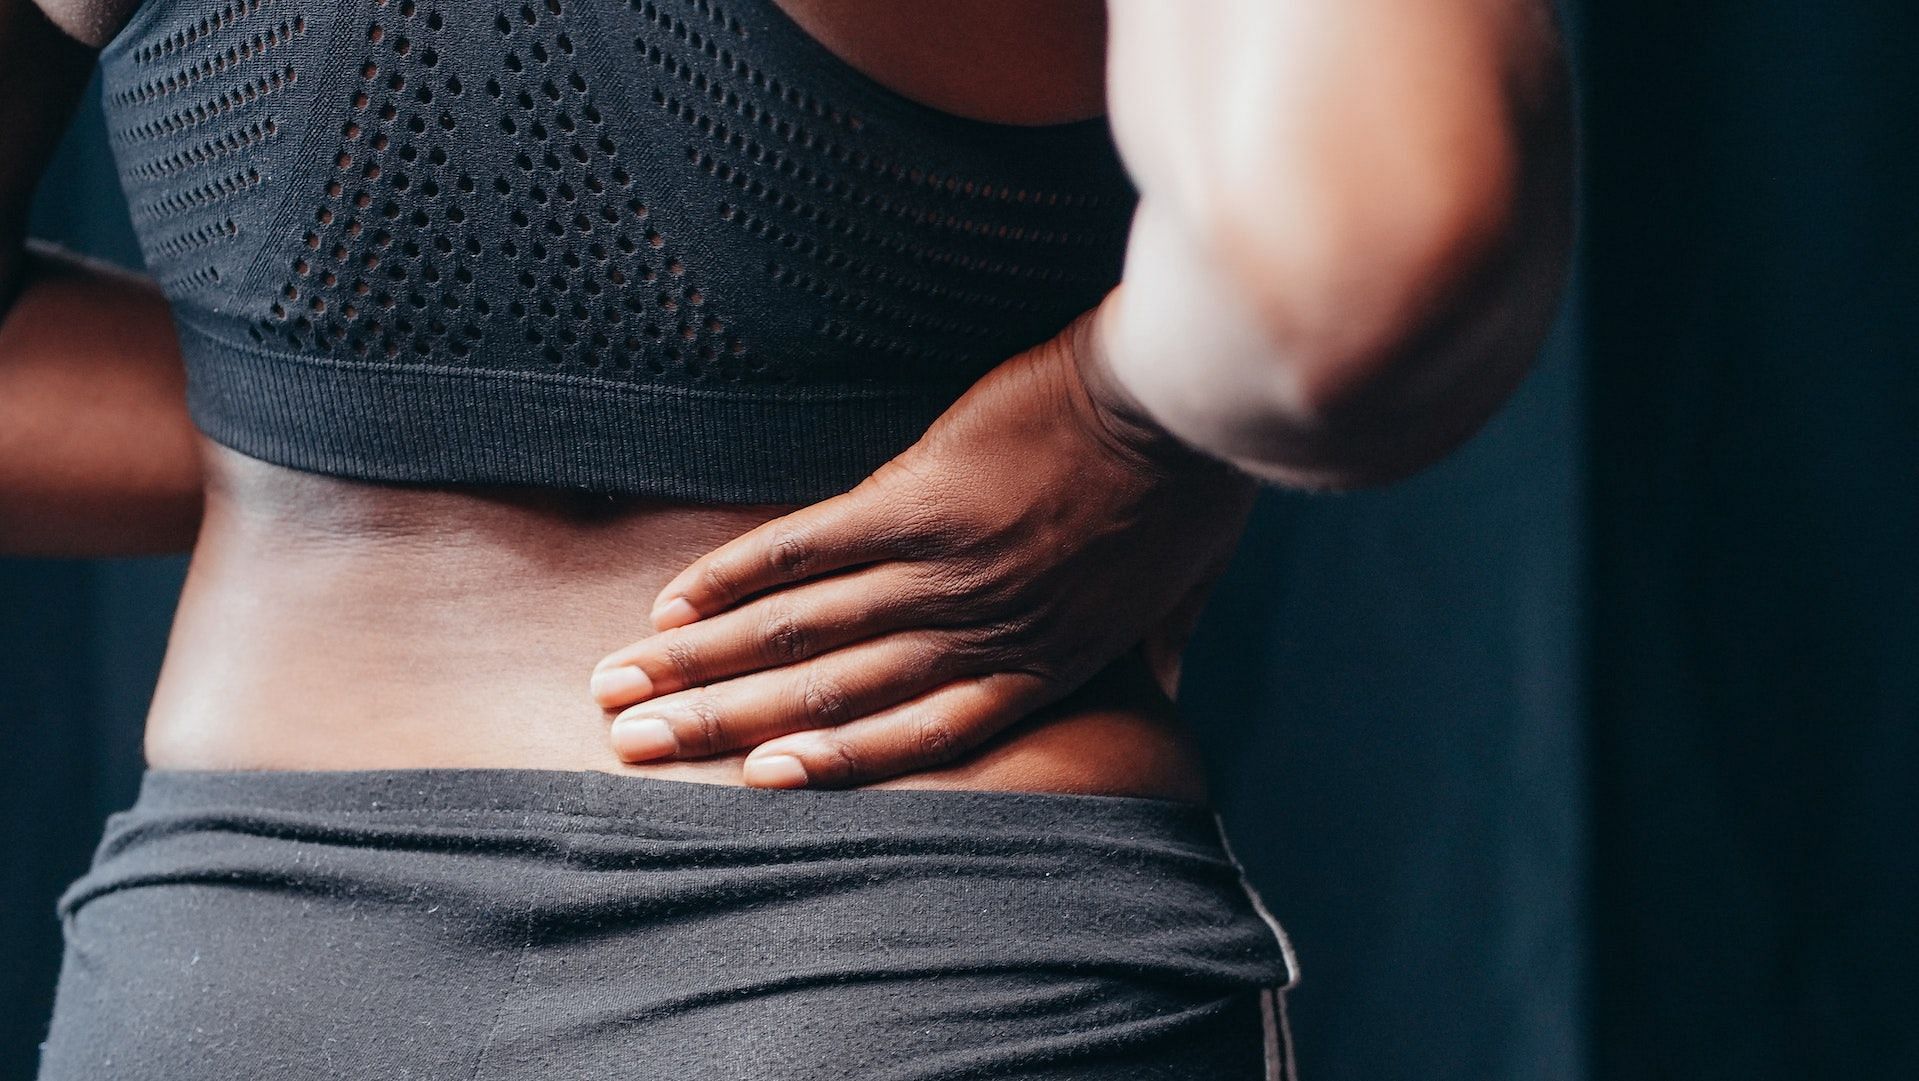 A common symptom of tailbone injuries include constant pain in the lower back area. (Photo via Pexels/Kindel Media)